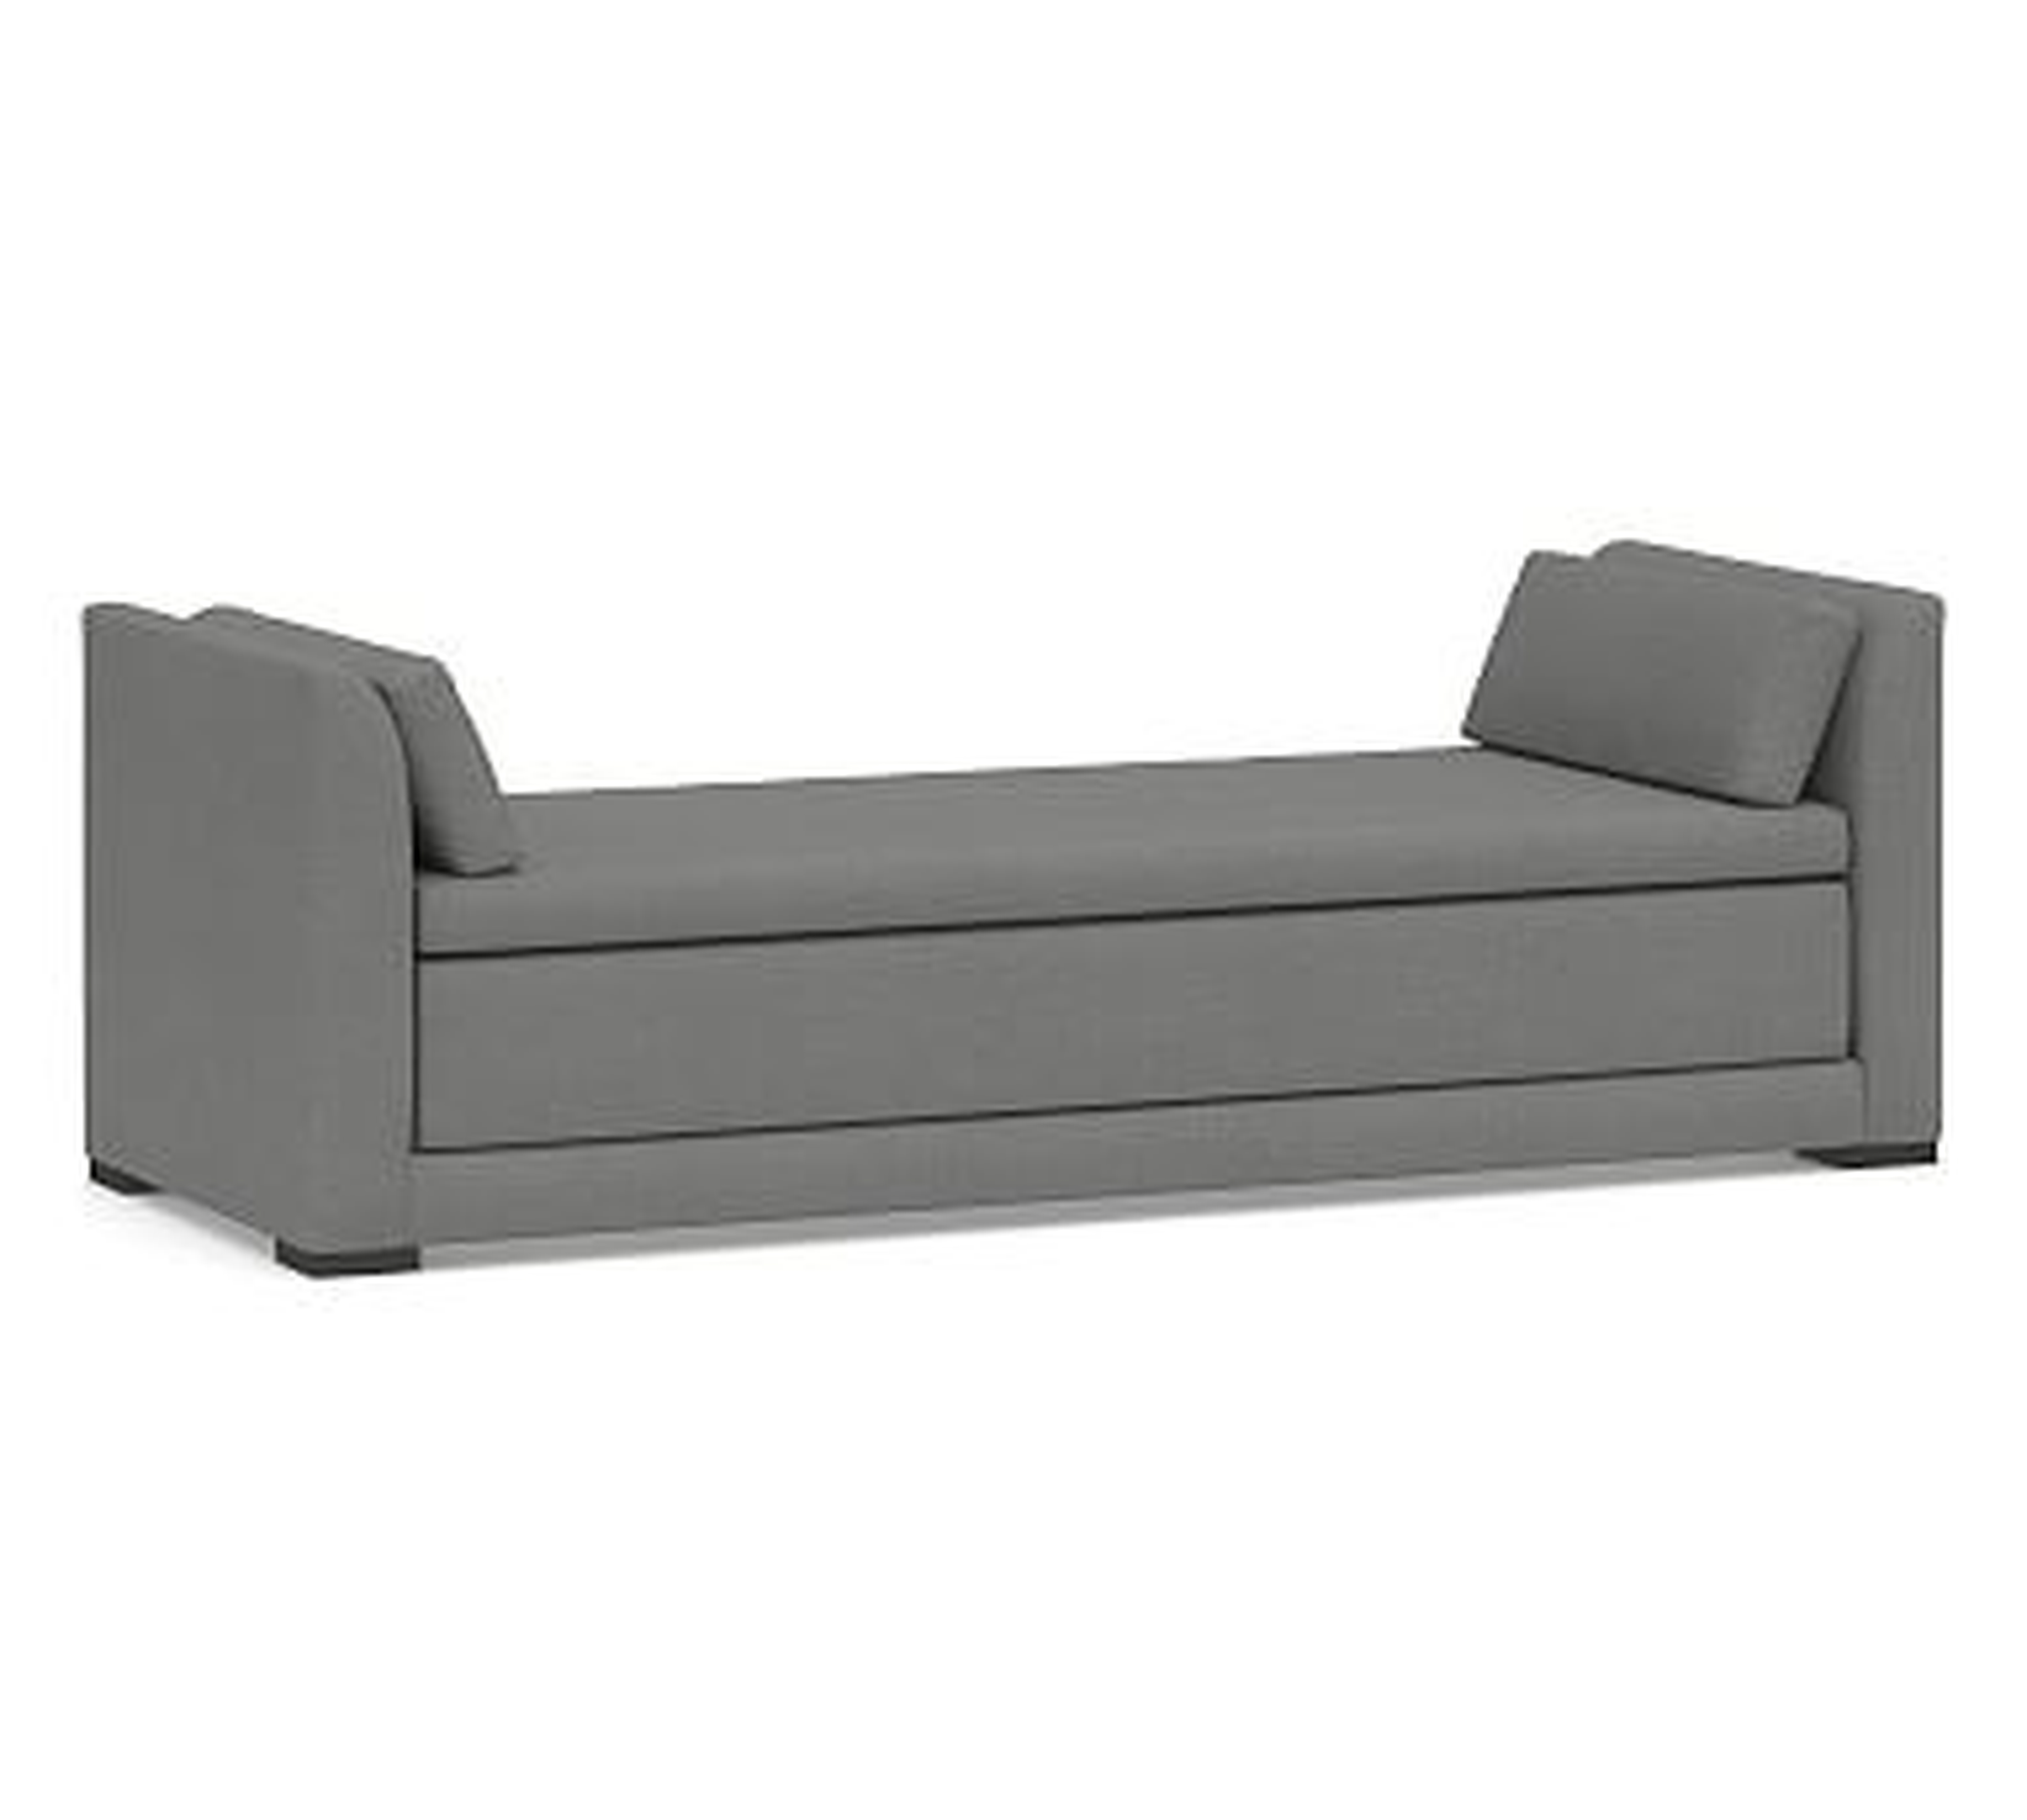 Luna Upholstered Daybed Sleeper, Polyester Wrapped Cushions, Basketweave Slub Charcoal - Pottery Barn